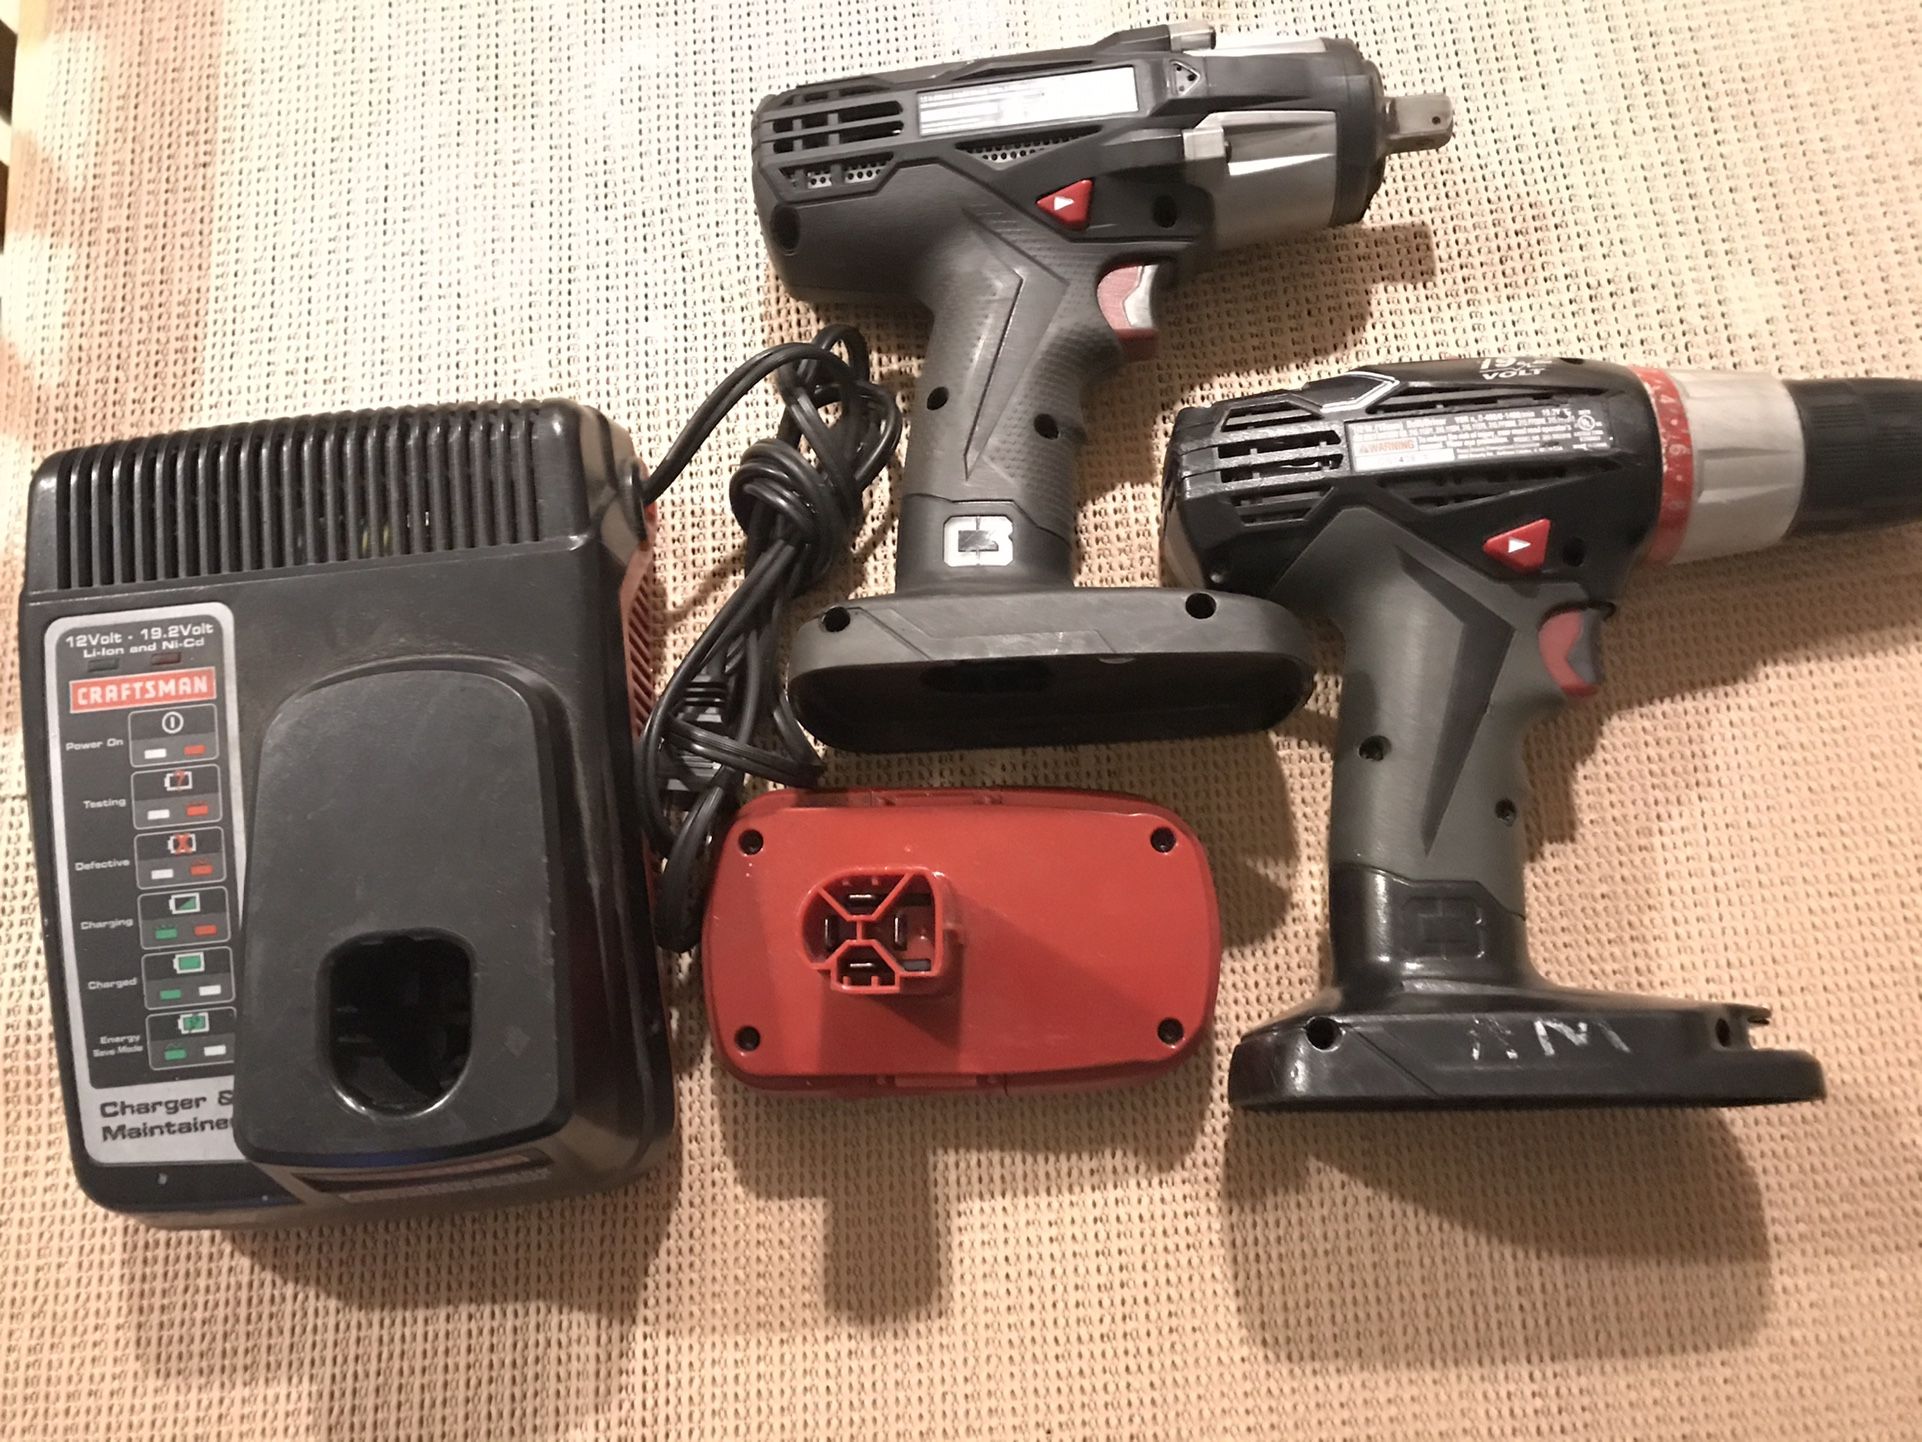 Craftsman Drill and 3/8” Compact Impact Wrench Combo